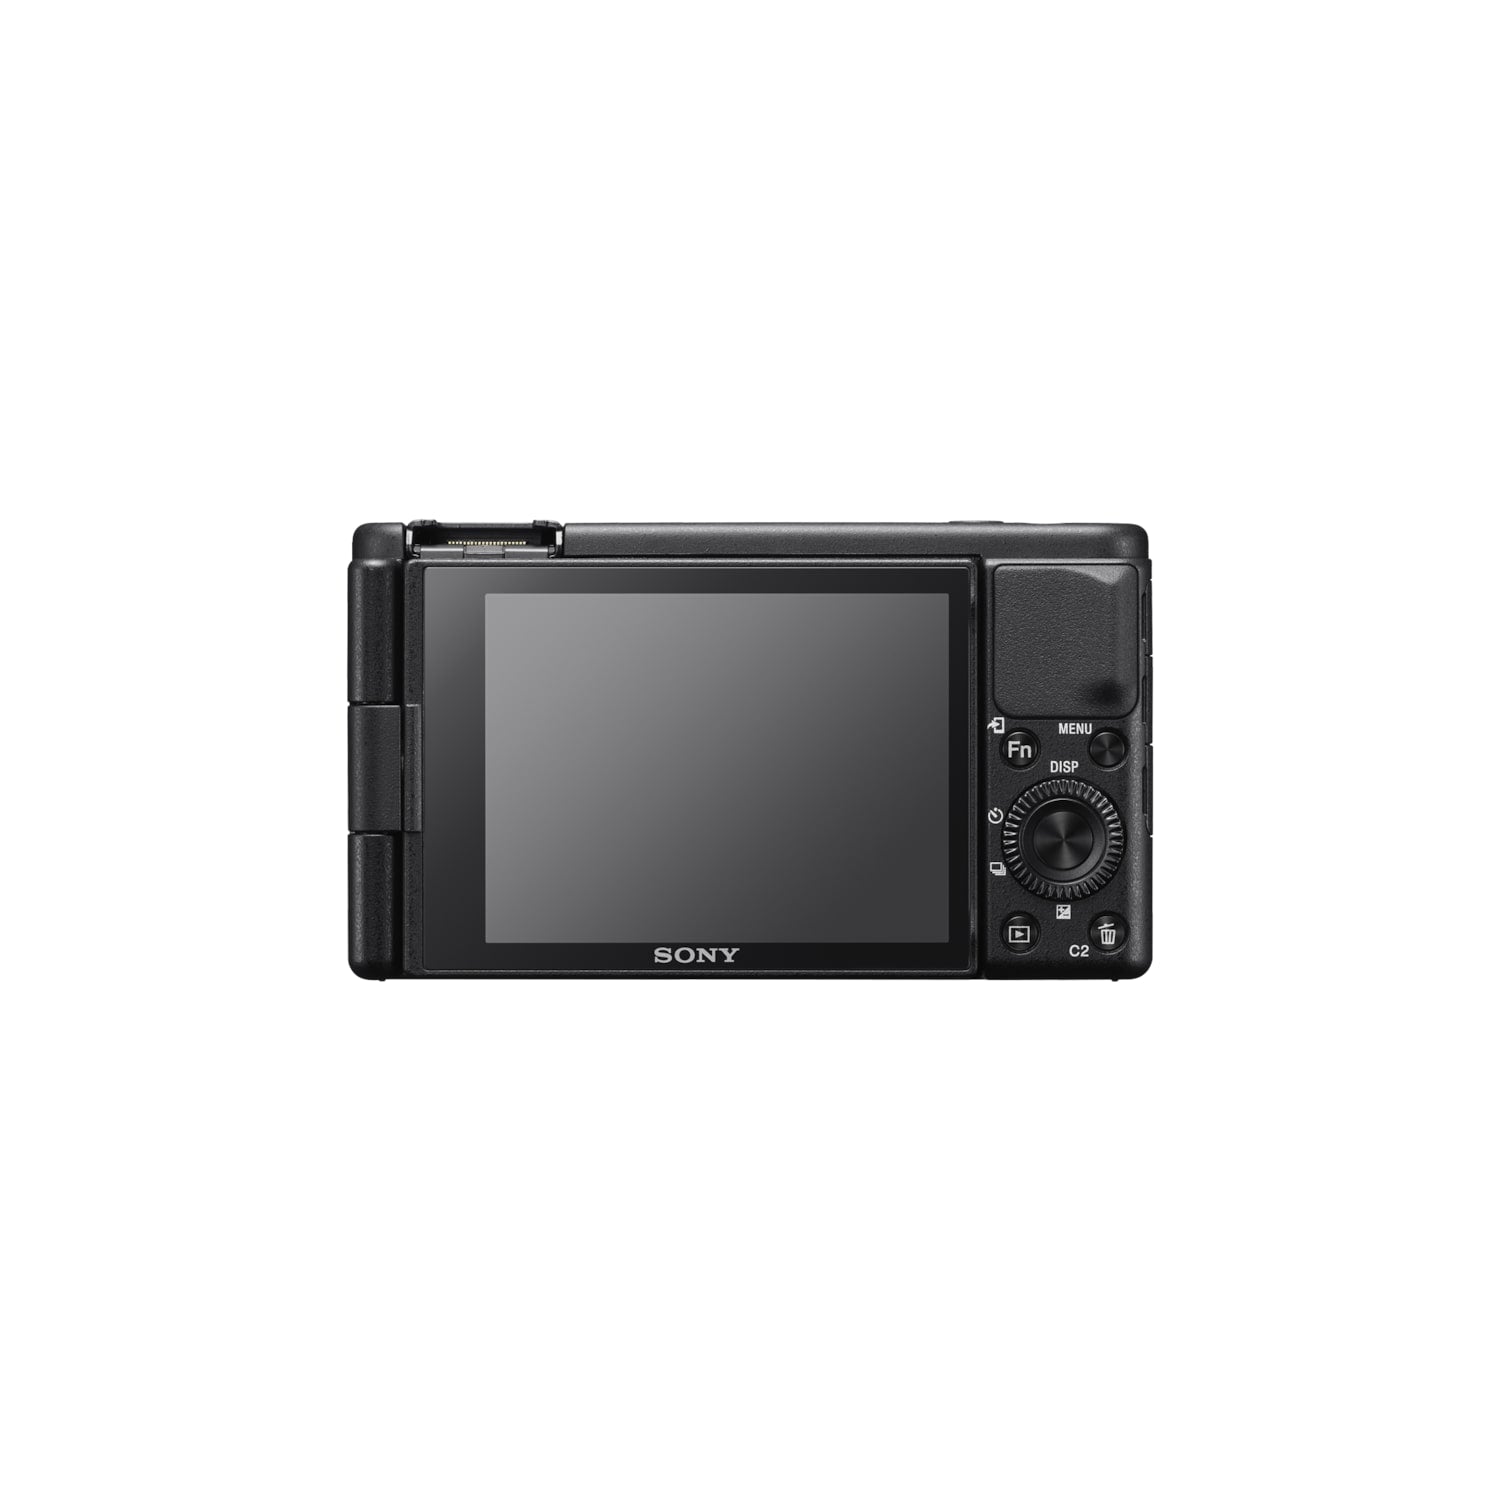 Sony ZV-1 Camera for Content Creators and Vloggers (Black)